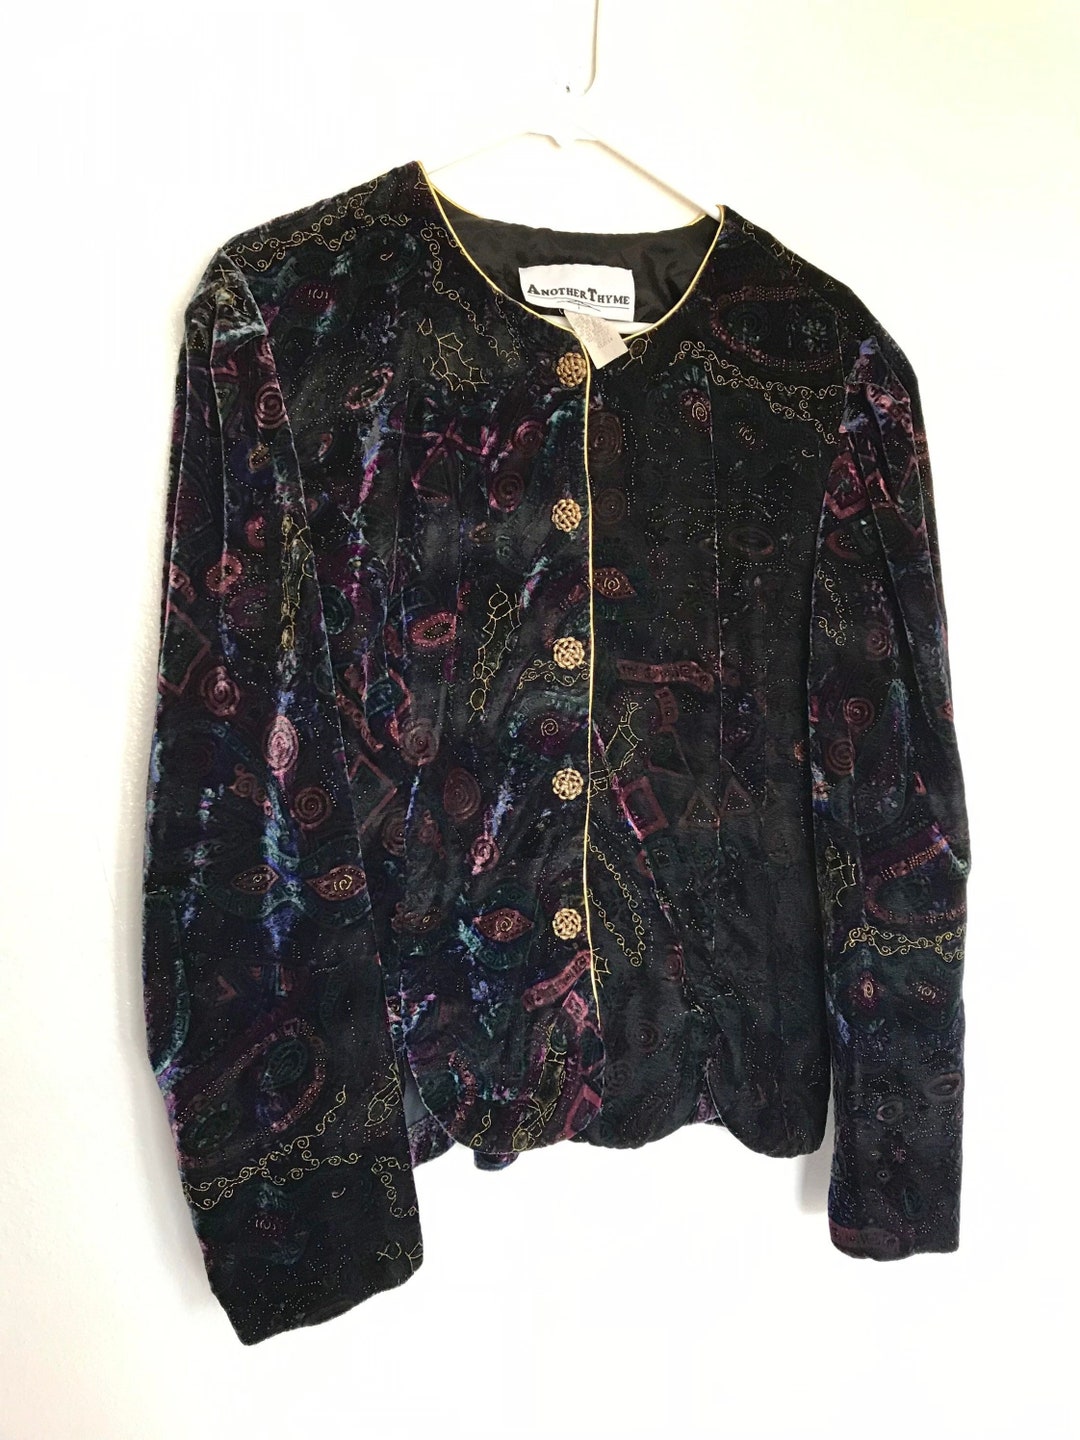 Vintage LARPING Jacket / 90s Another Thyme SHINY Veleveteen - Etsy